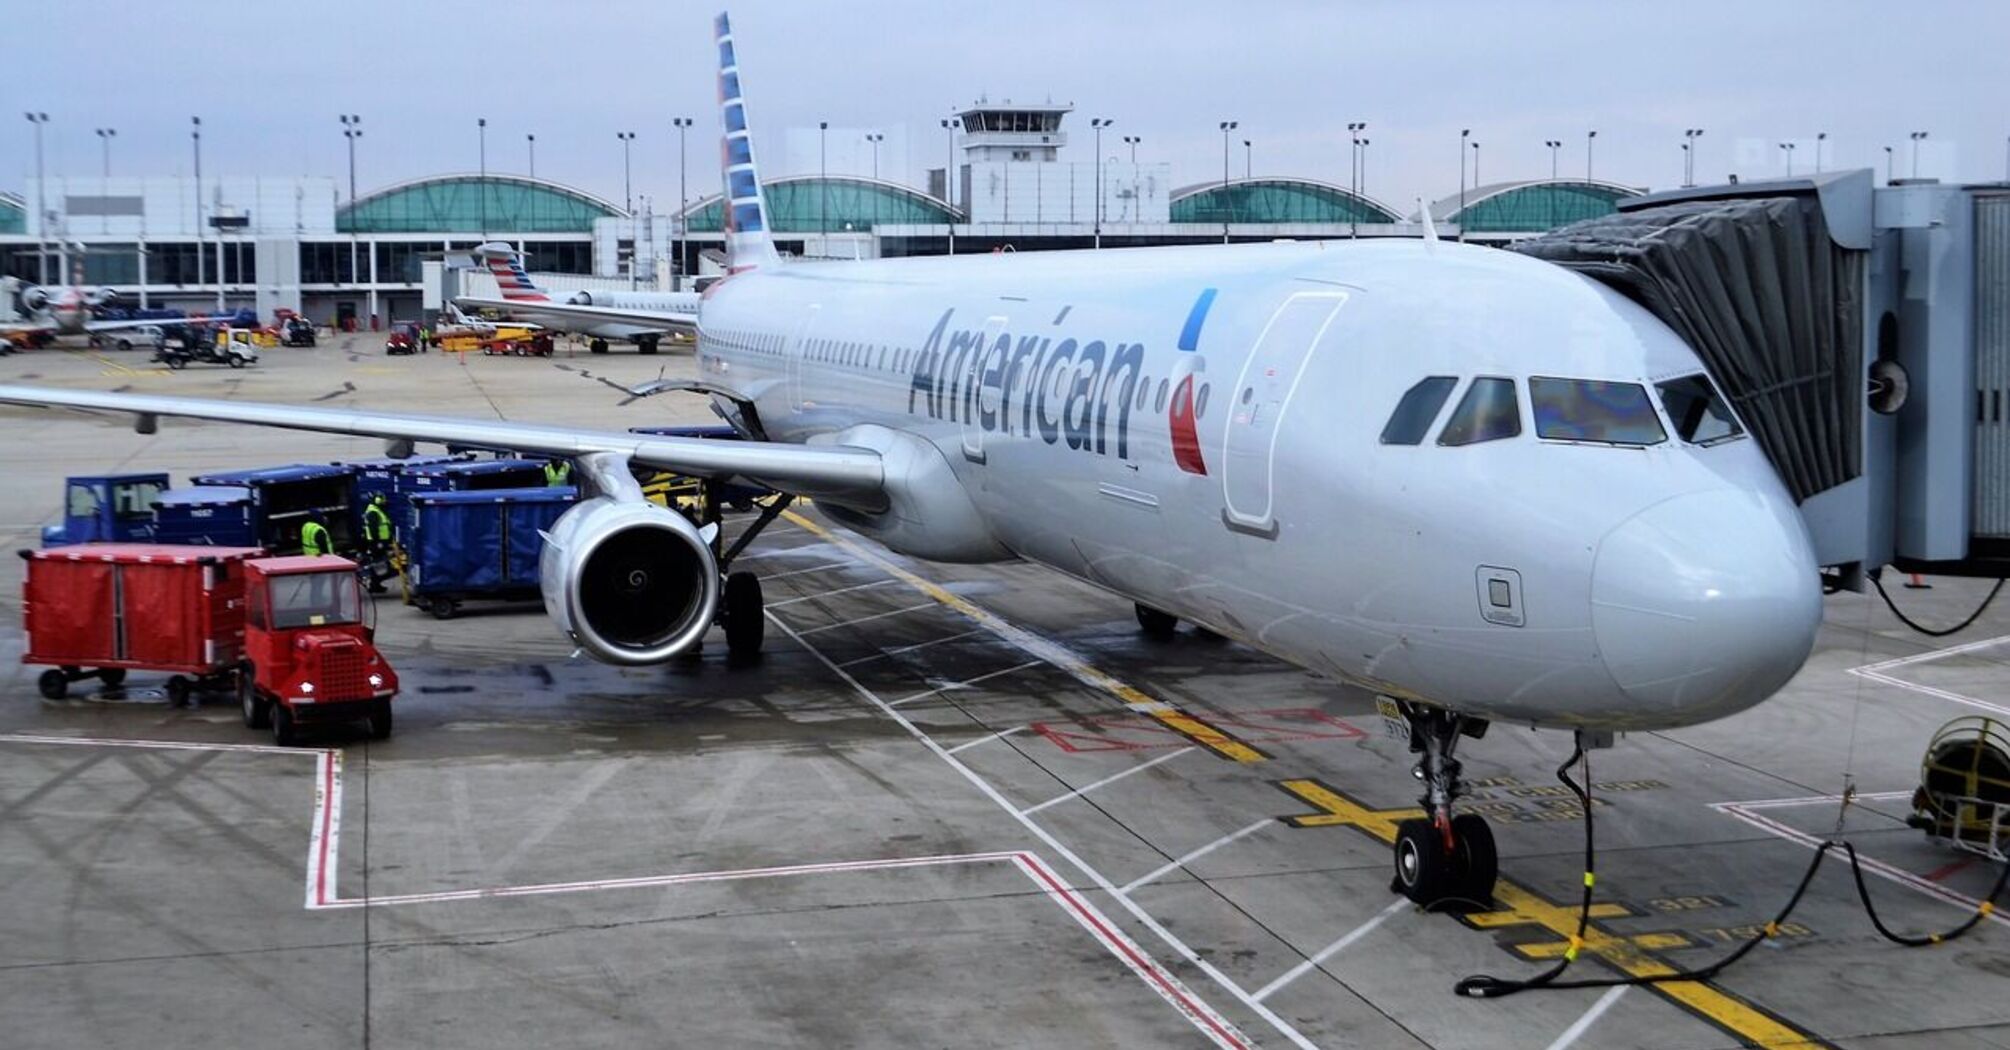 American Airlines plane made a "hard landing" in Maui: six people hospitalized